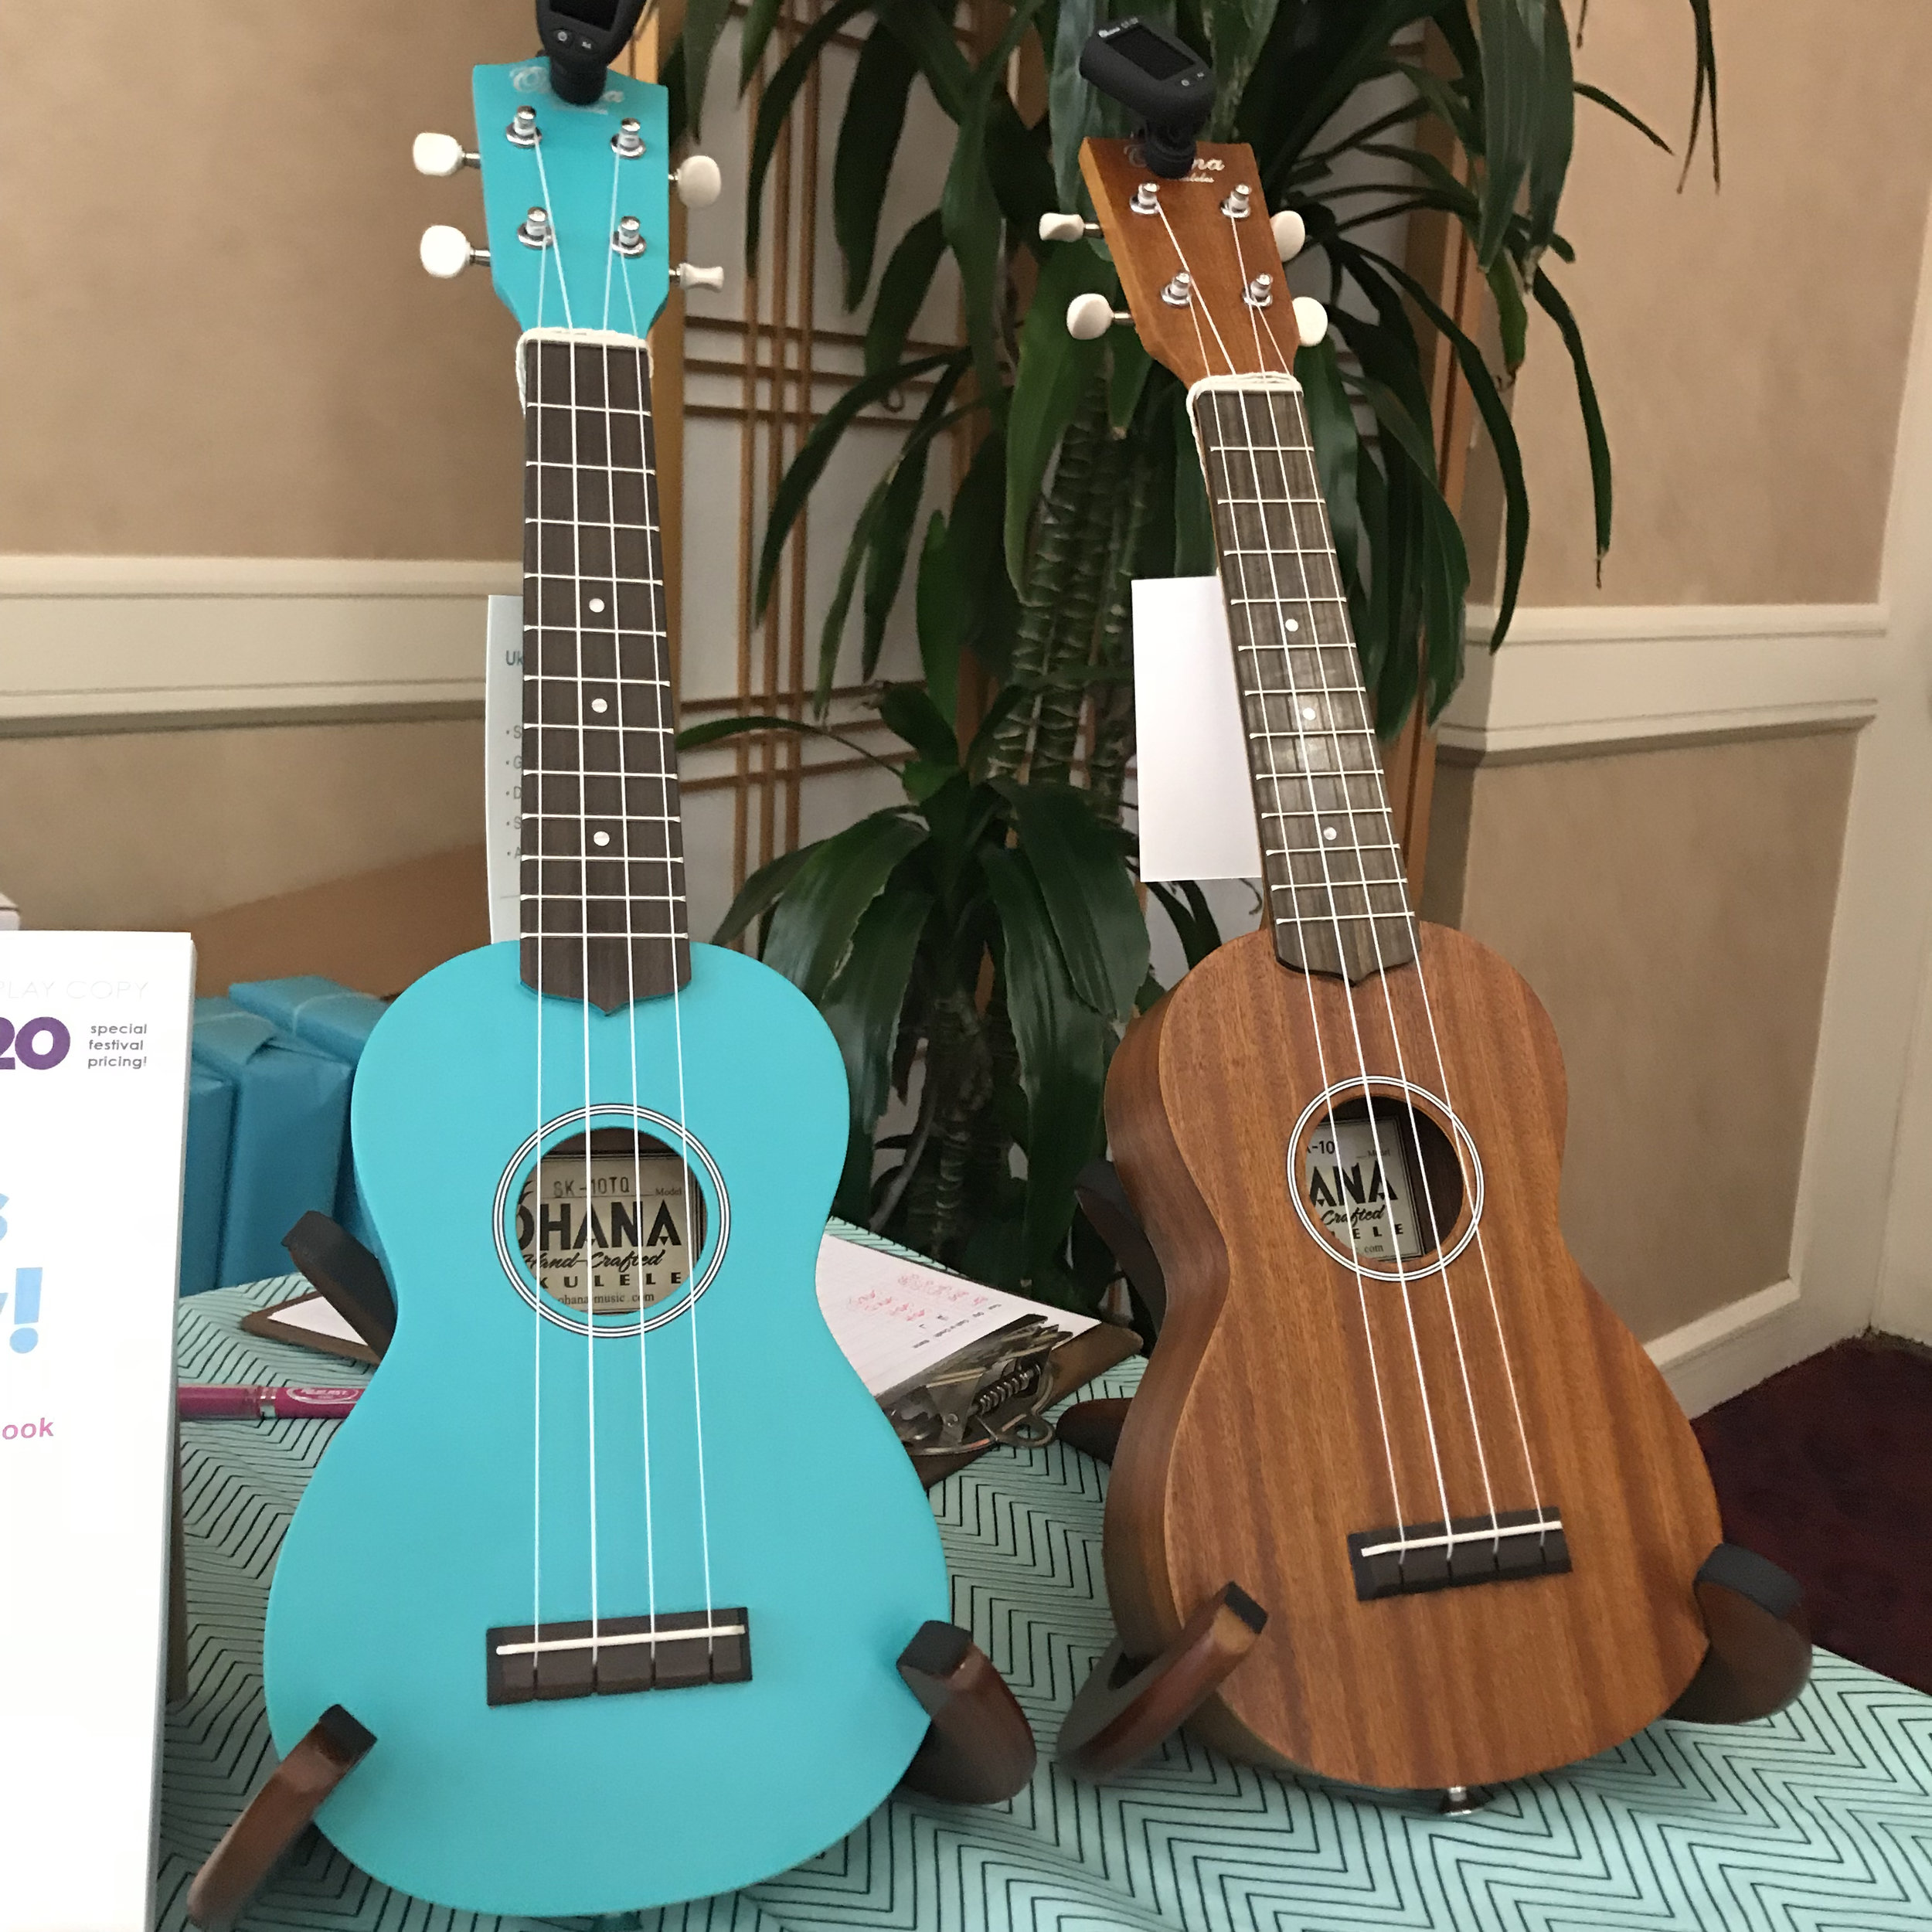 Can you guess which uke was more popular?